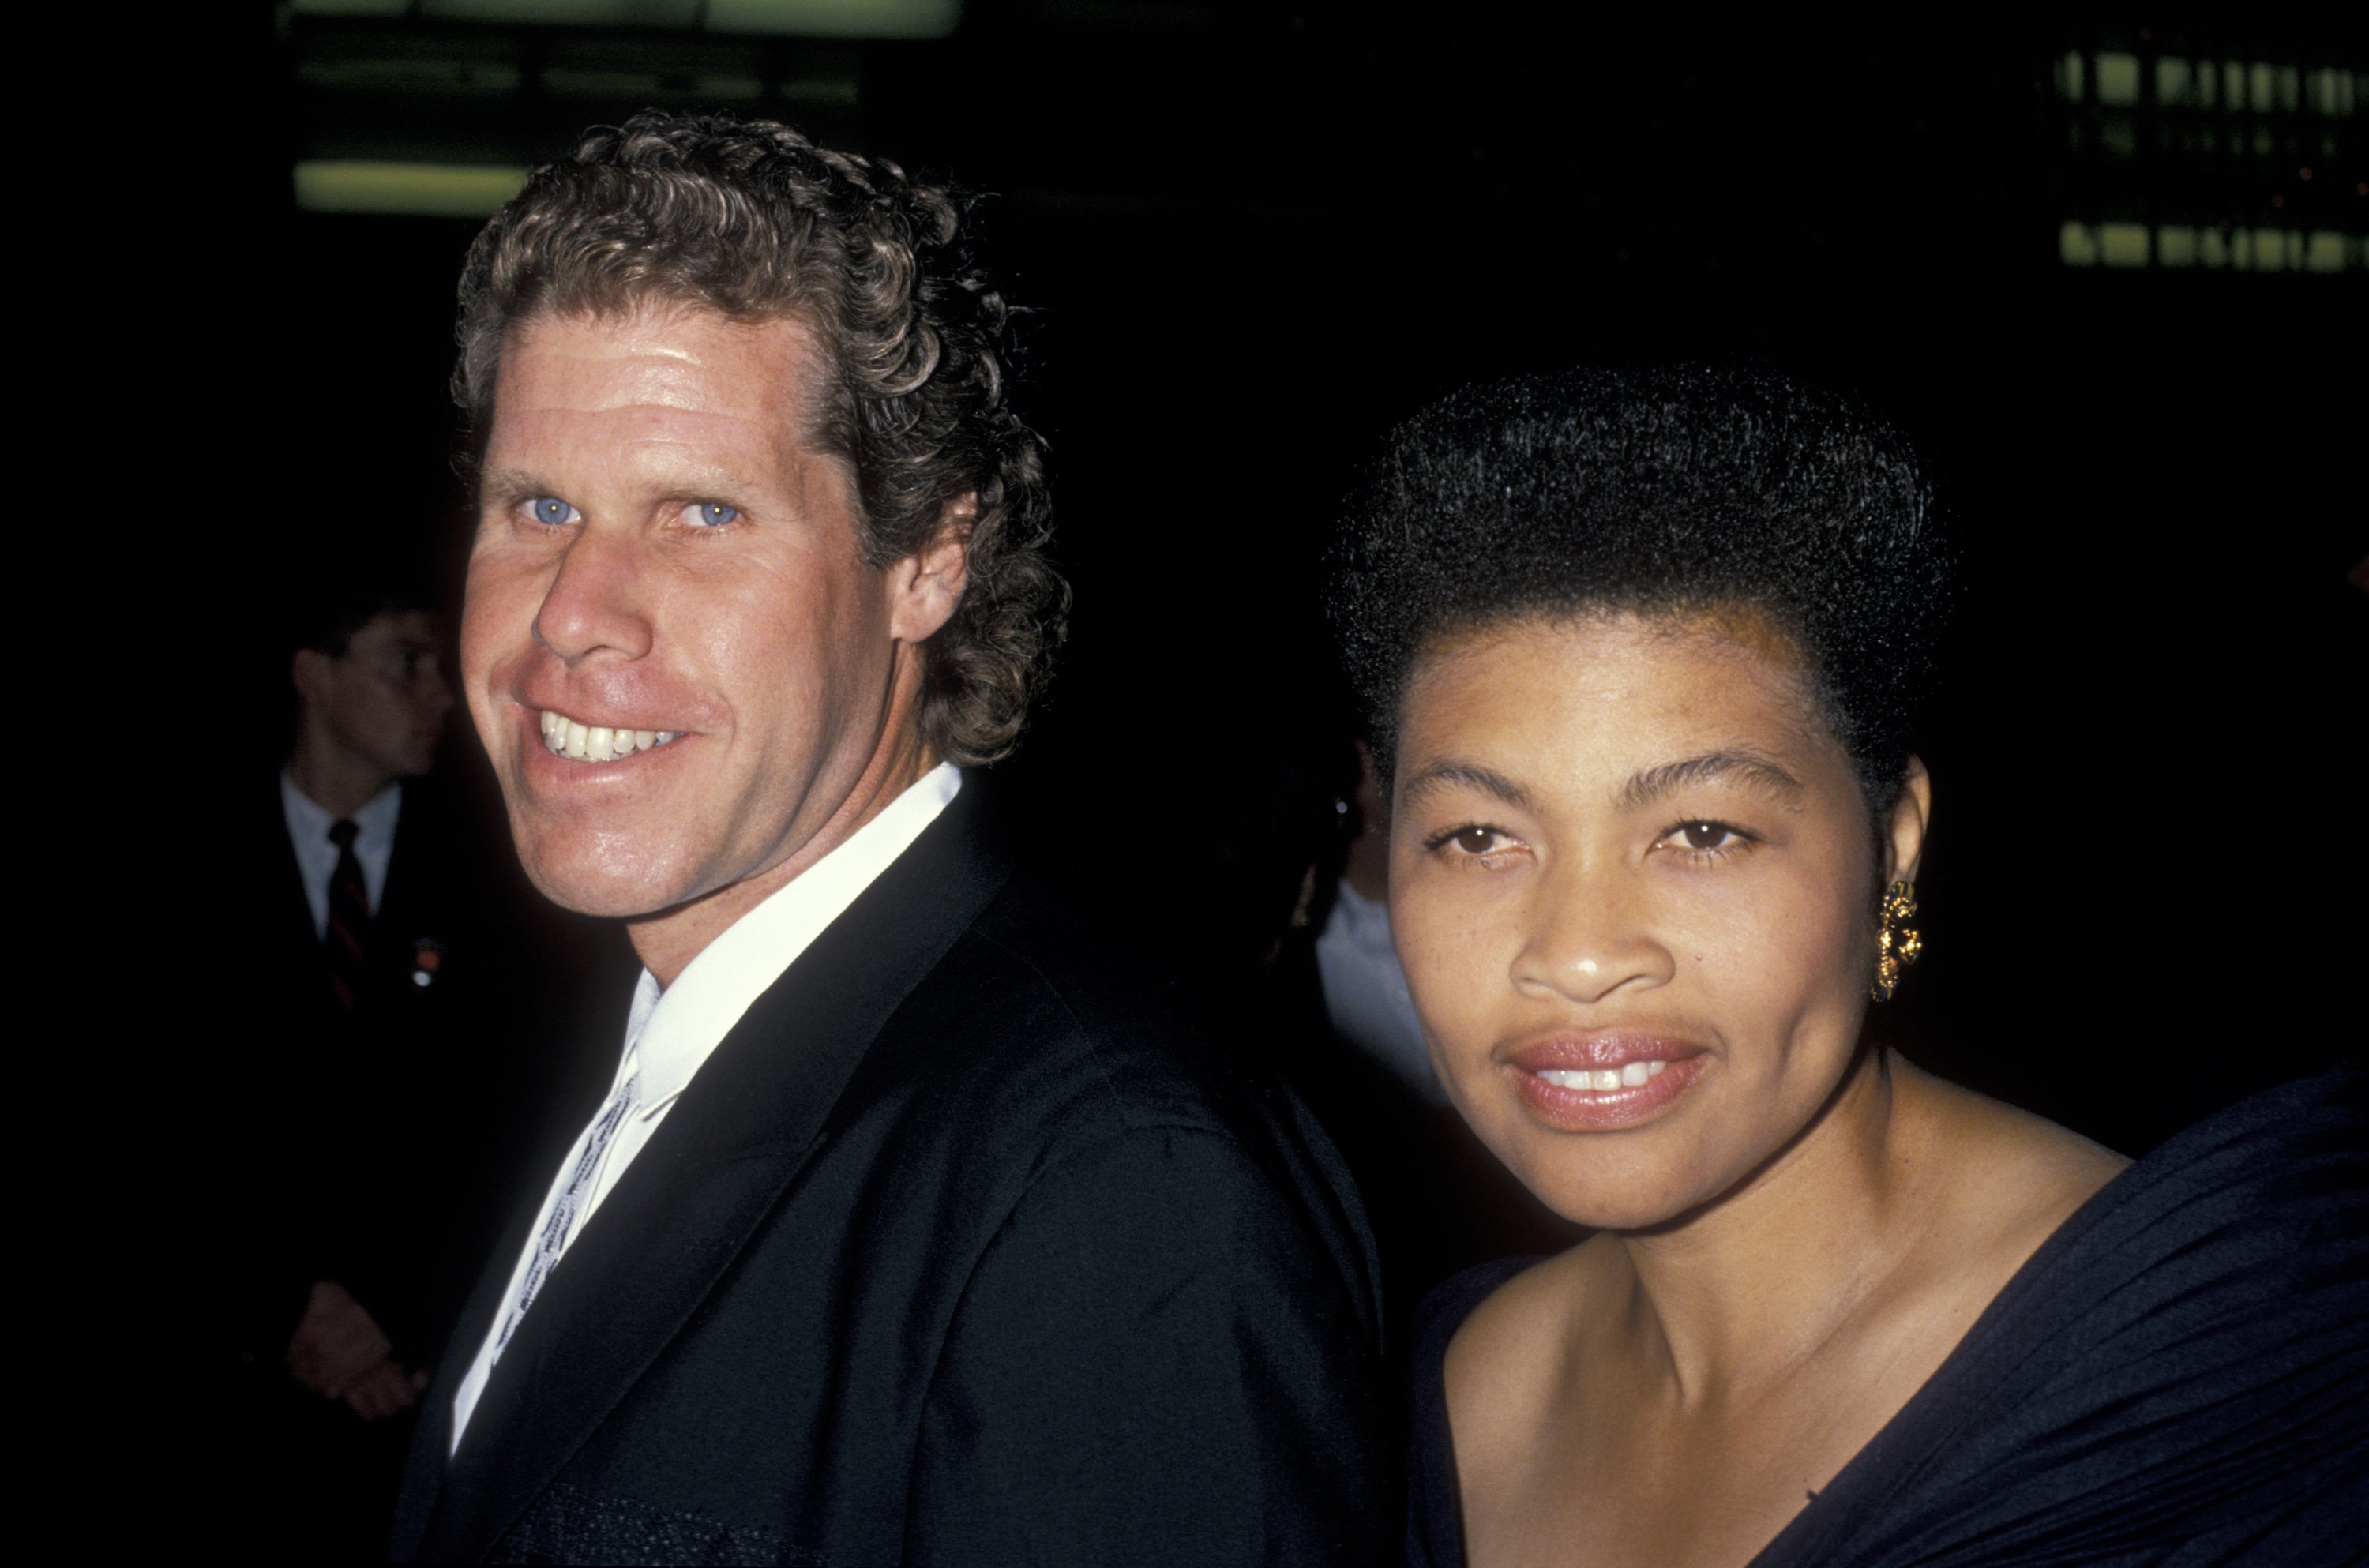 Ron Perlman and Opal Stone at the premiere of "Great Balls of Fire" on June 29, 1989, in Hollywood, California. | Source: Getty Images